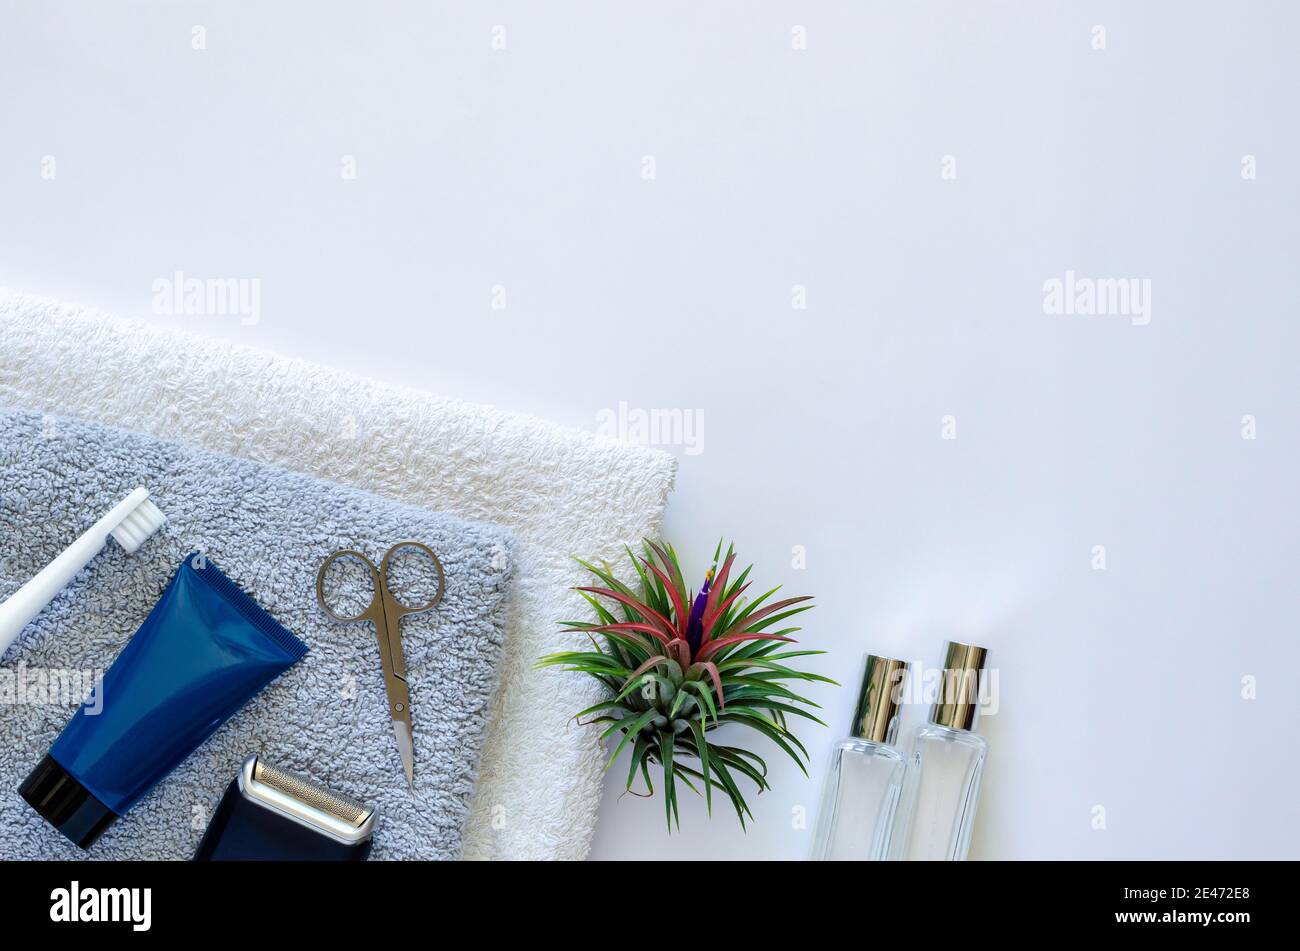 Men toiletries in modern lifestyle on towels with air plant Tillandsia on white background. Stock Photo